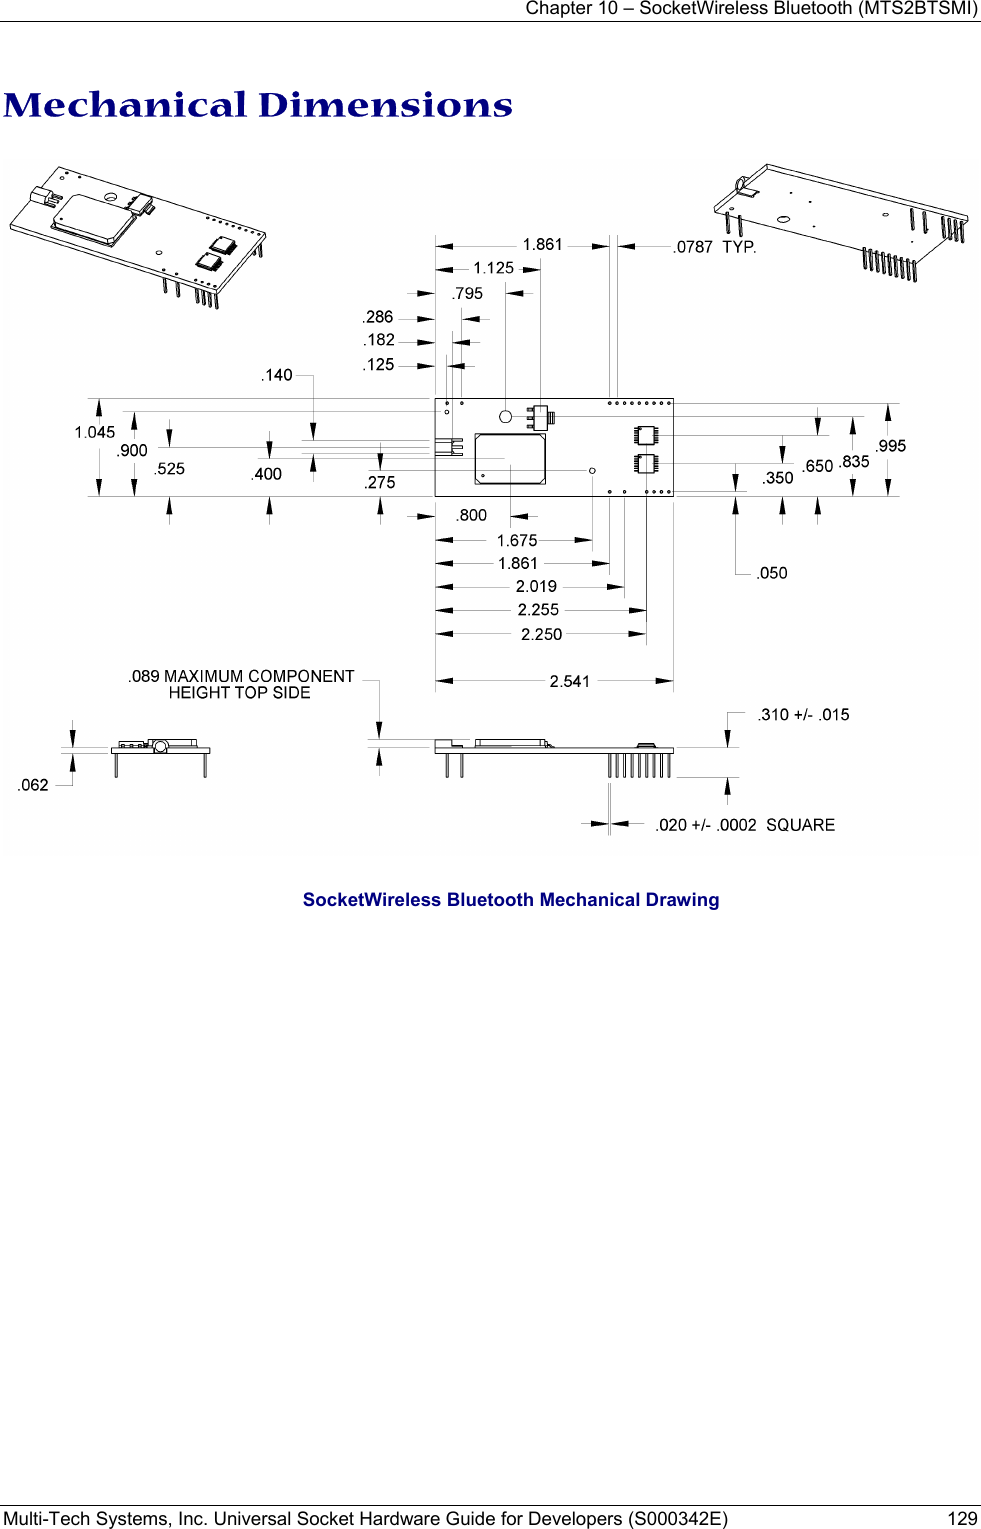 Chapter 10 – SocketWireless Bluetooth (MTS2BTSMI) Multi-Tech Systems, Inc. Universal Socket Hardware Guide for Developers (S000342E)  129  Mechanical Dimensions    SocketWireless Bluetooth Mechanical Drawing  